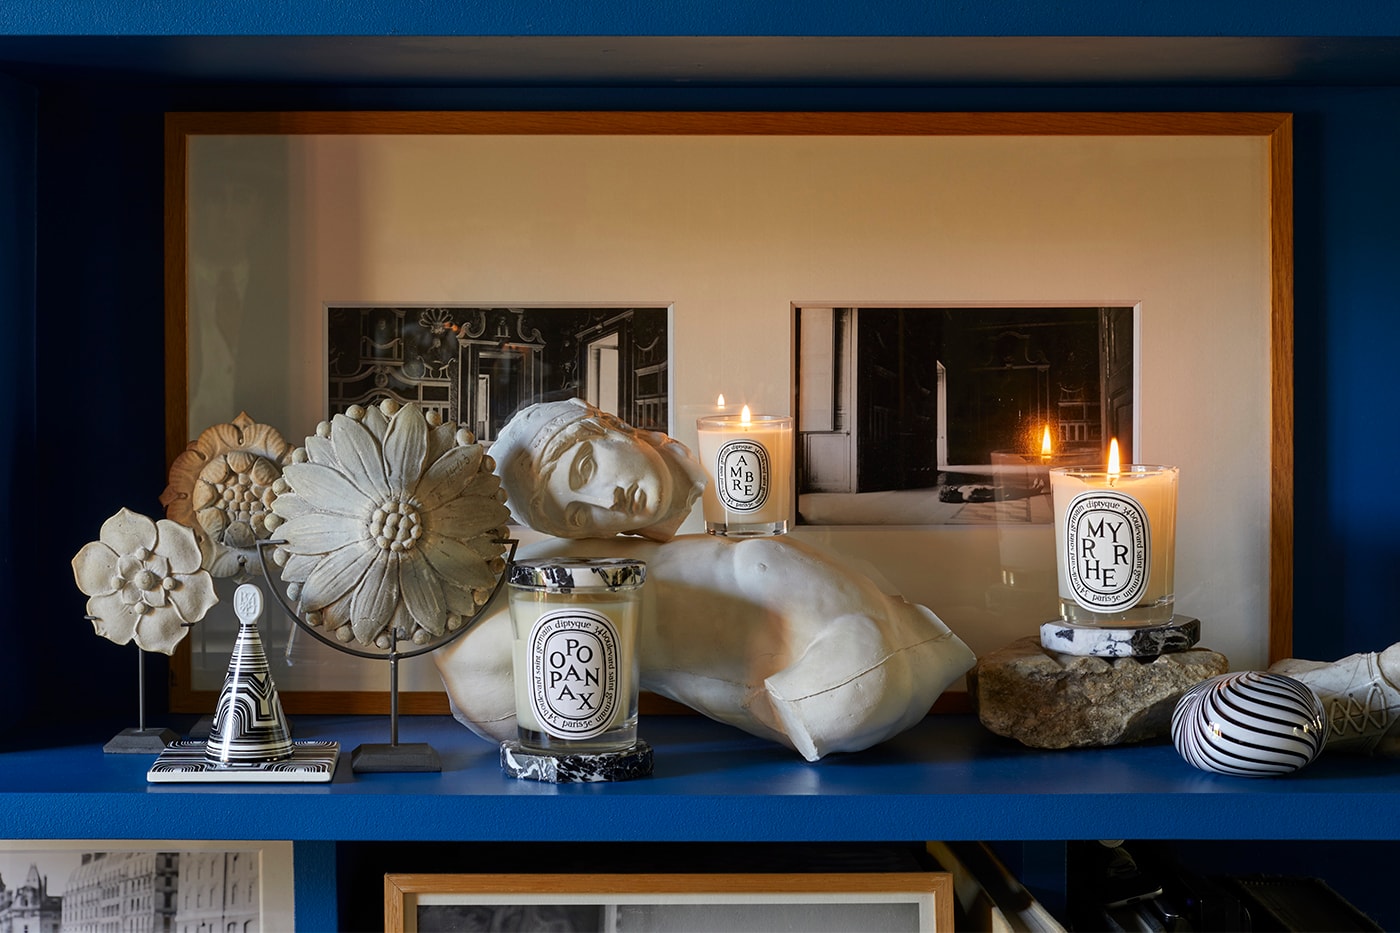 Diptyque Launches "Simple Objects" Collection in Celebration of the Candle